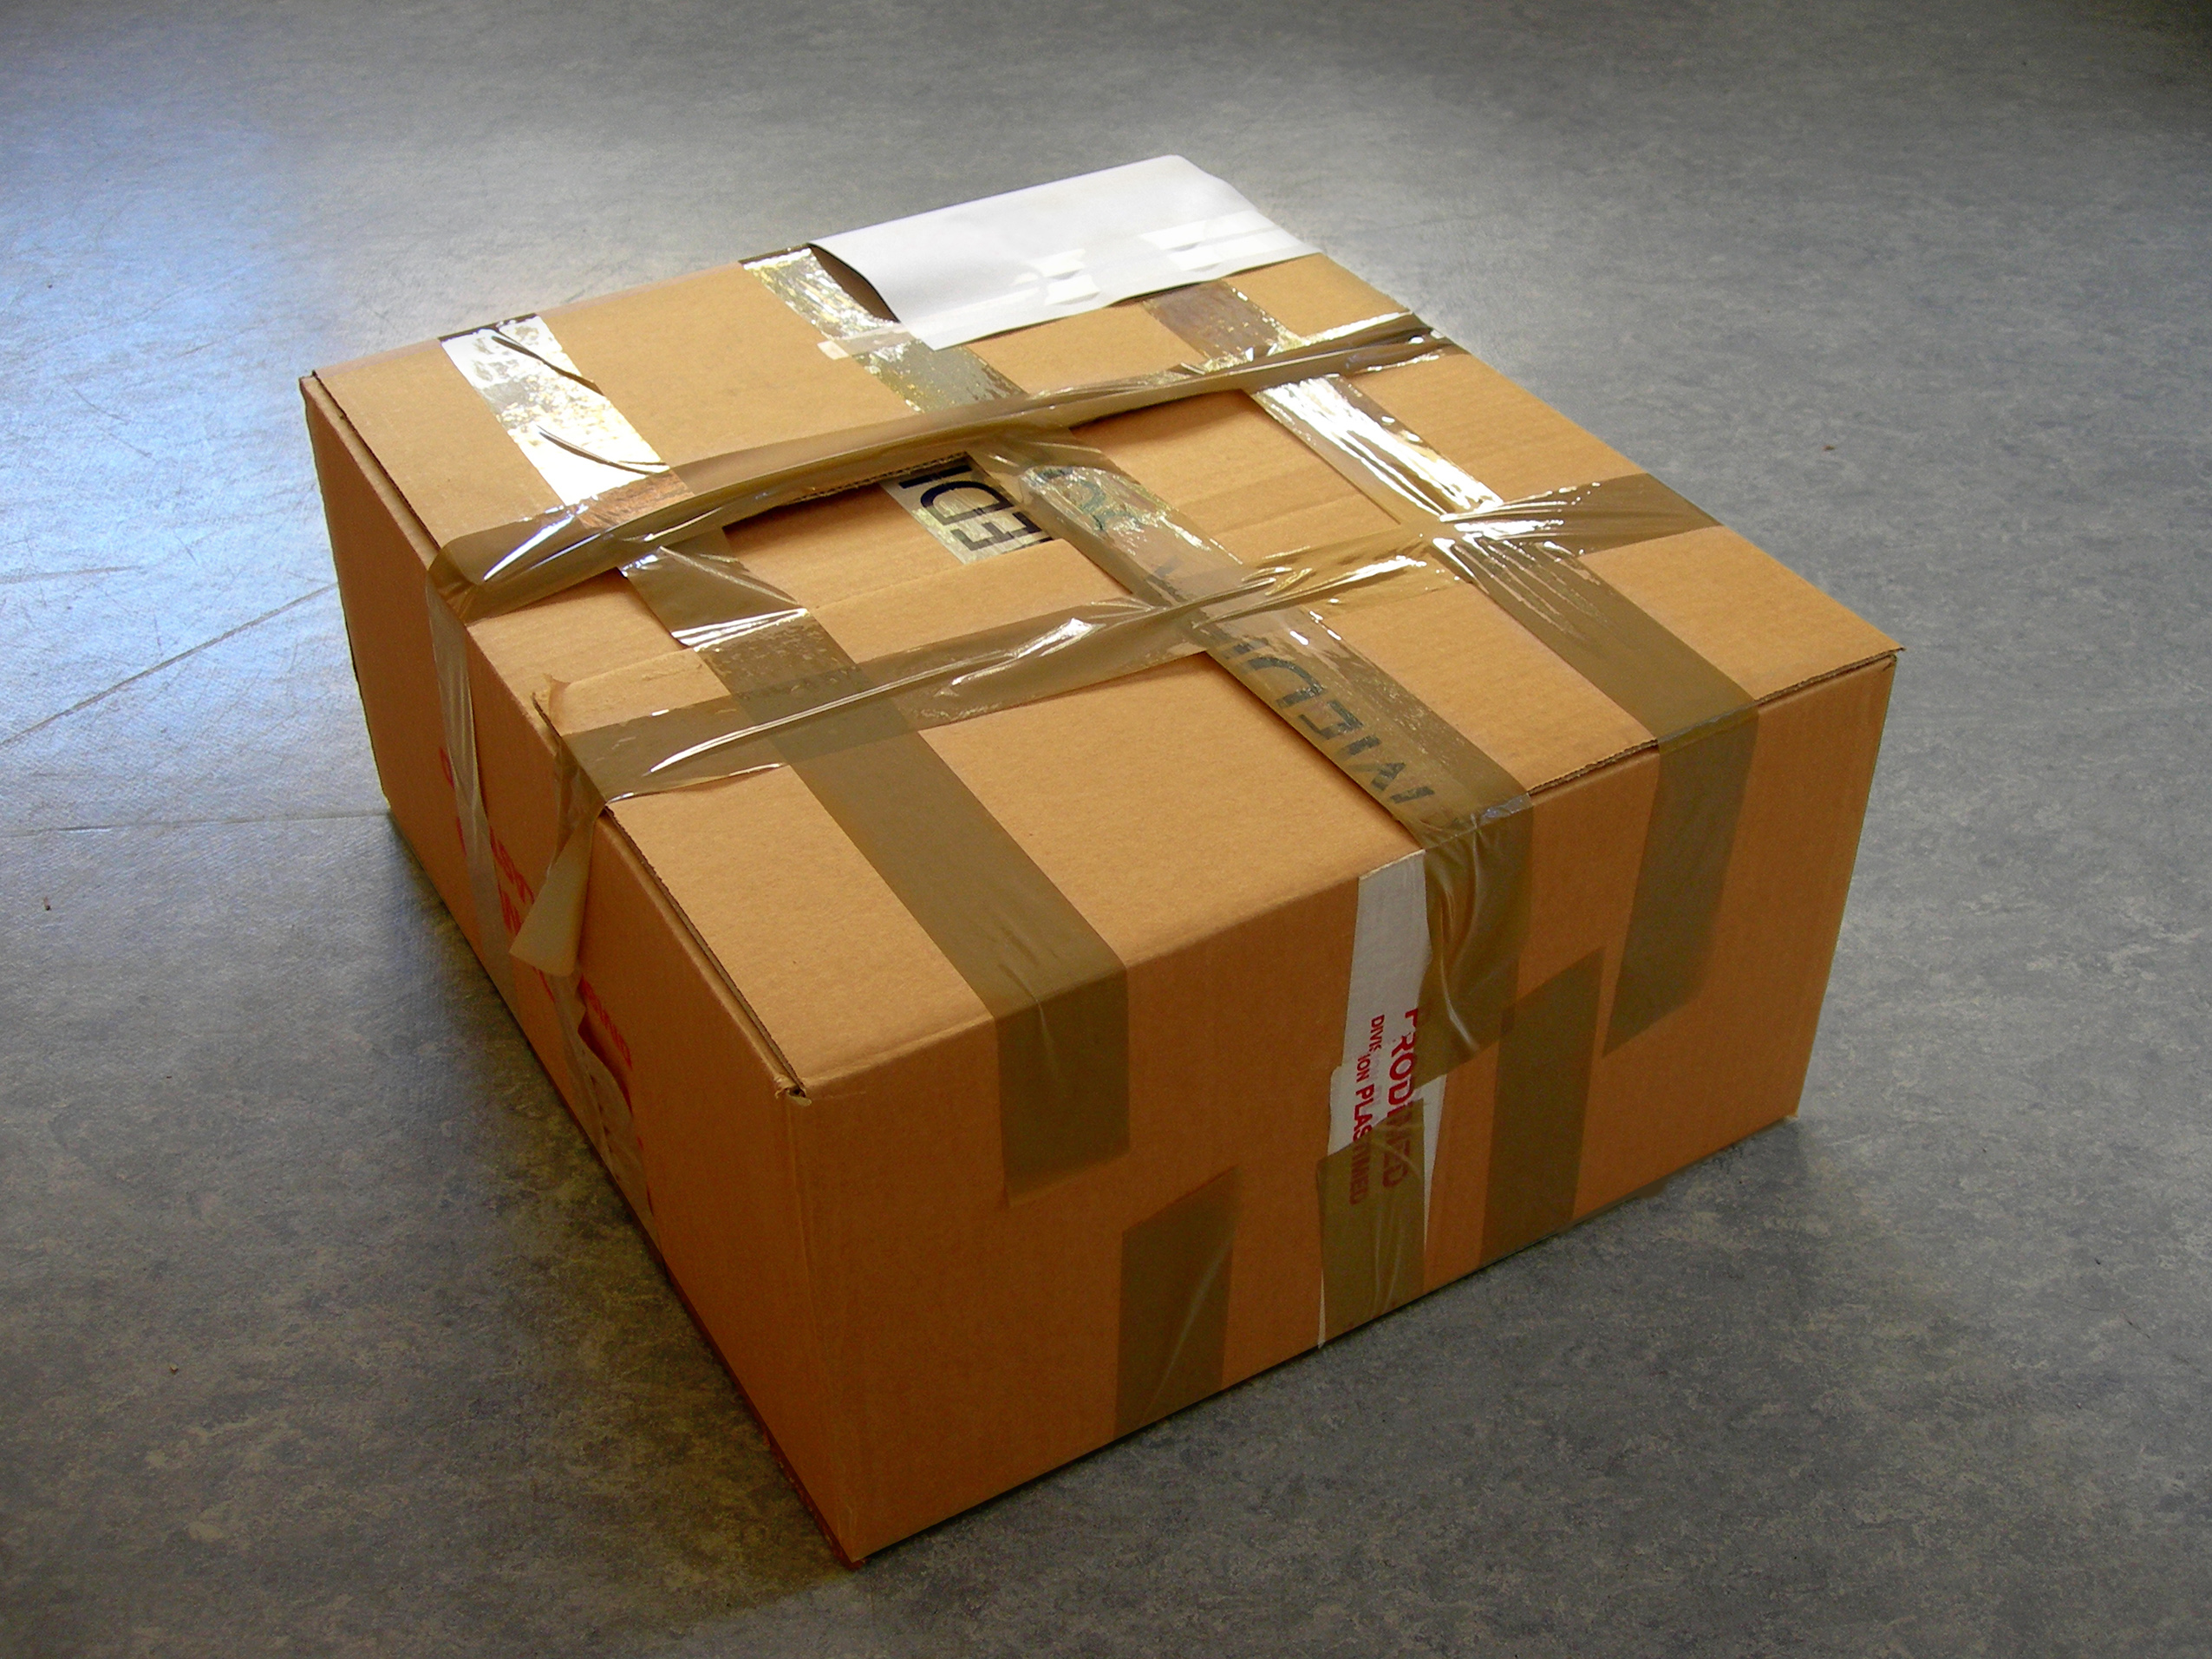 Large brown package covered in tape